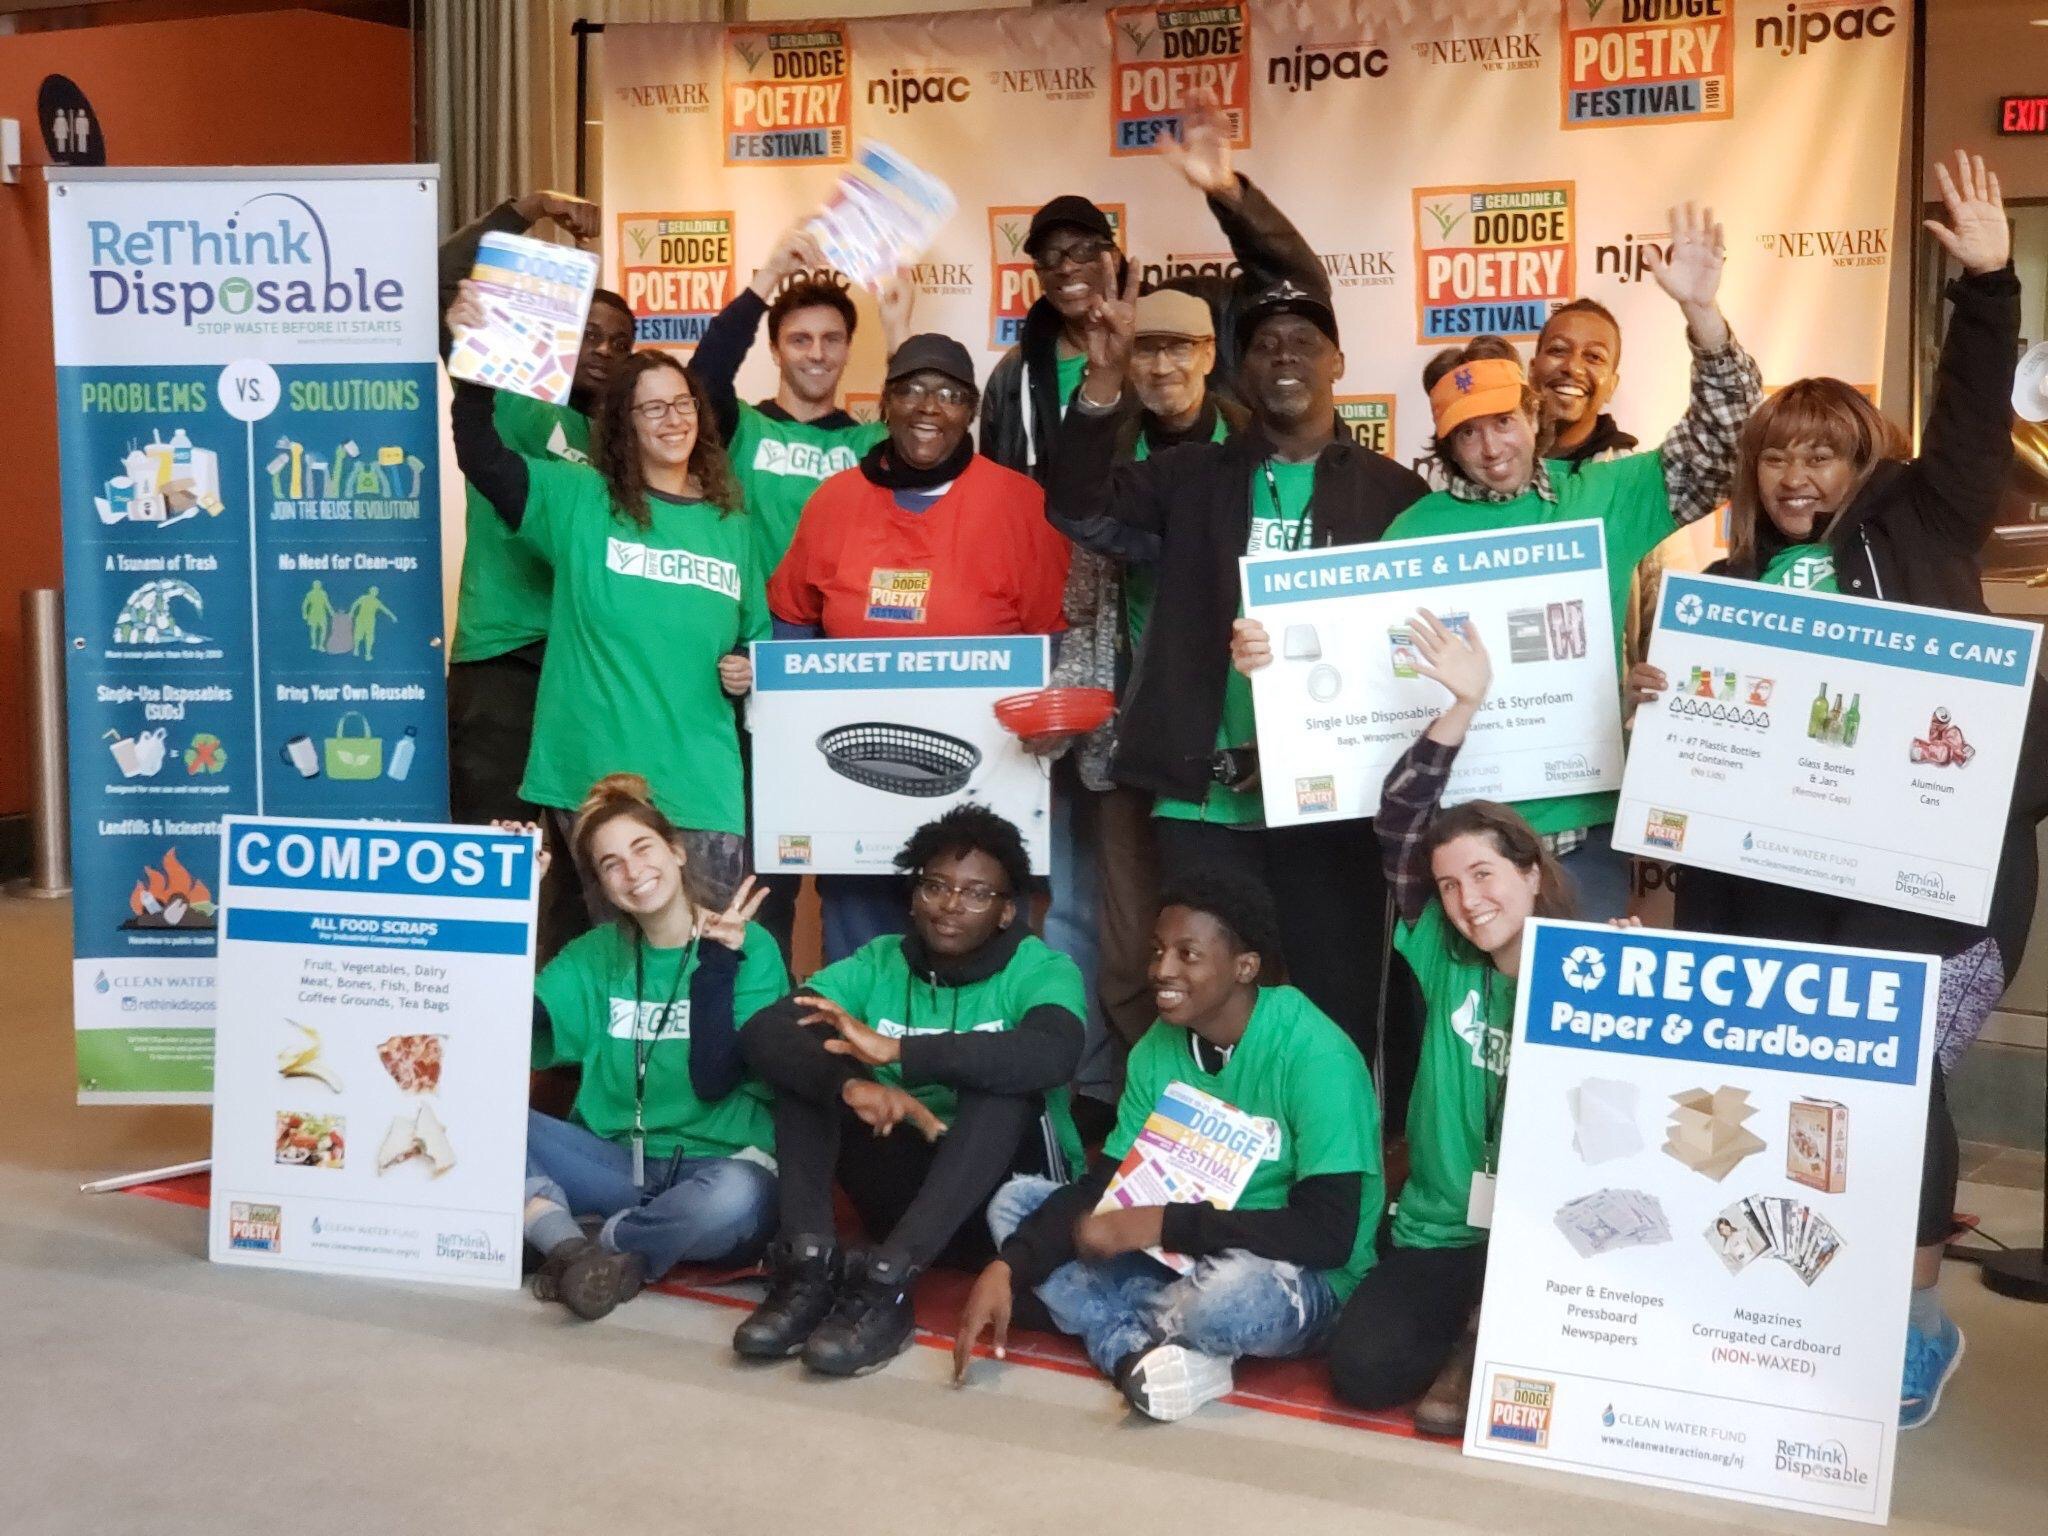 Crowd posing with ReThink Disposable information and recycling/compost educational signs